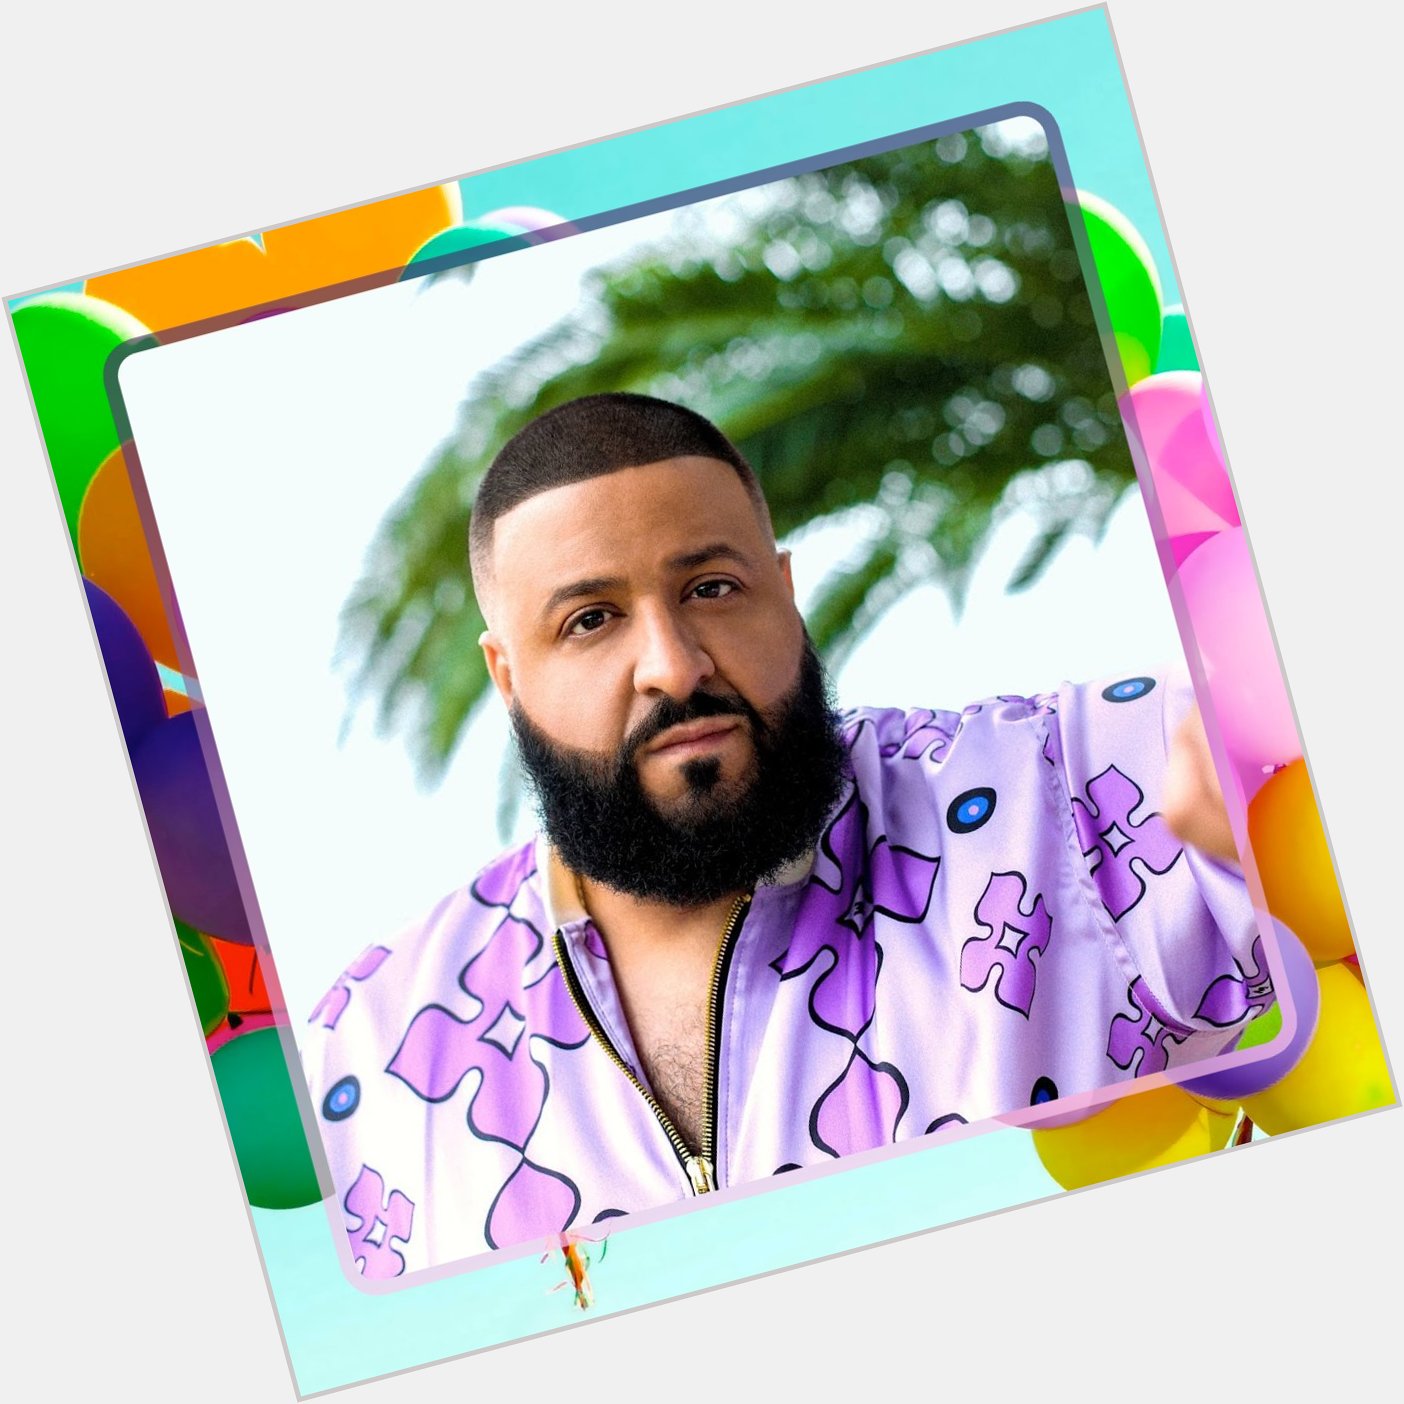 Happy Birthday What is your favourite track by Dj Khaled?? 